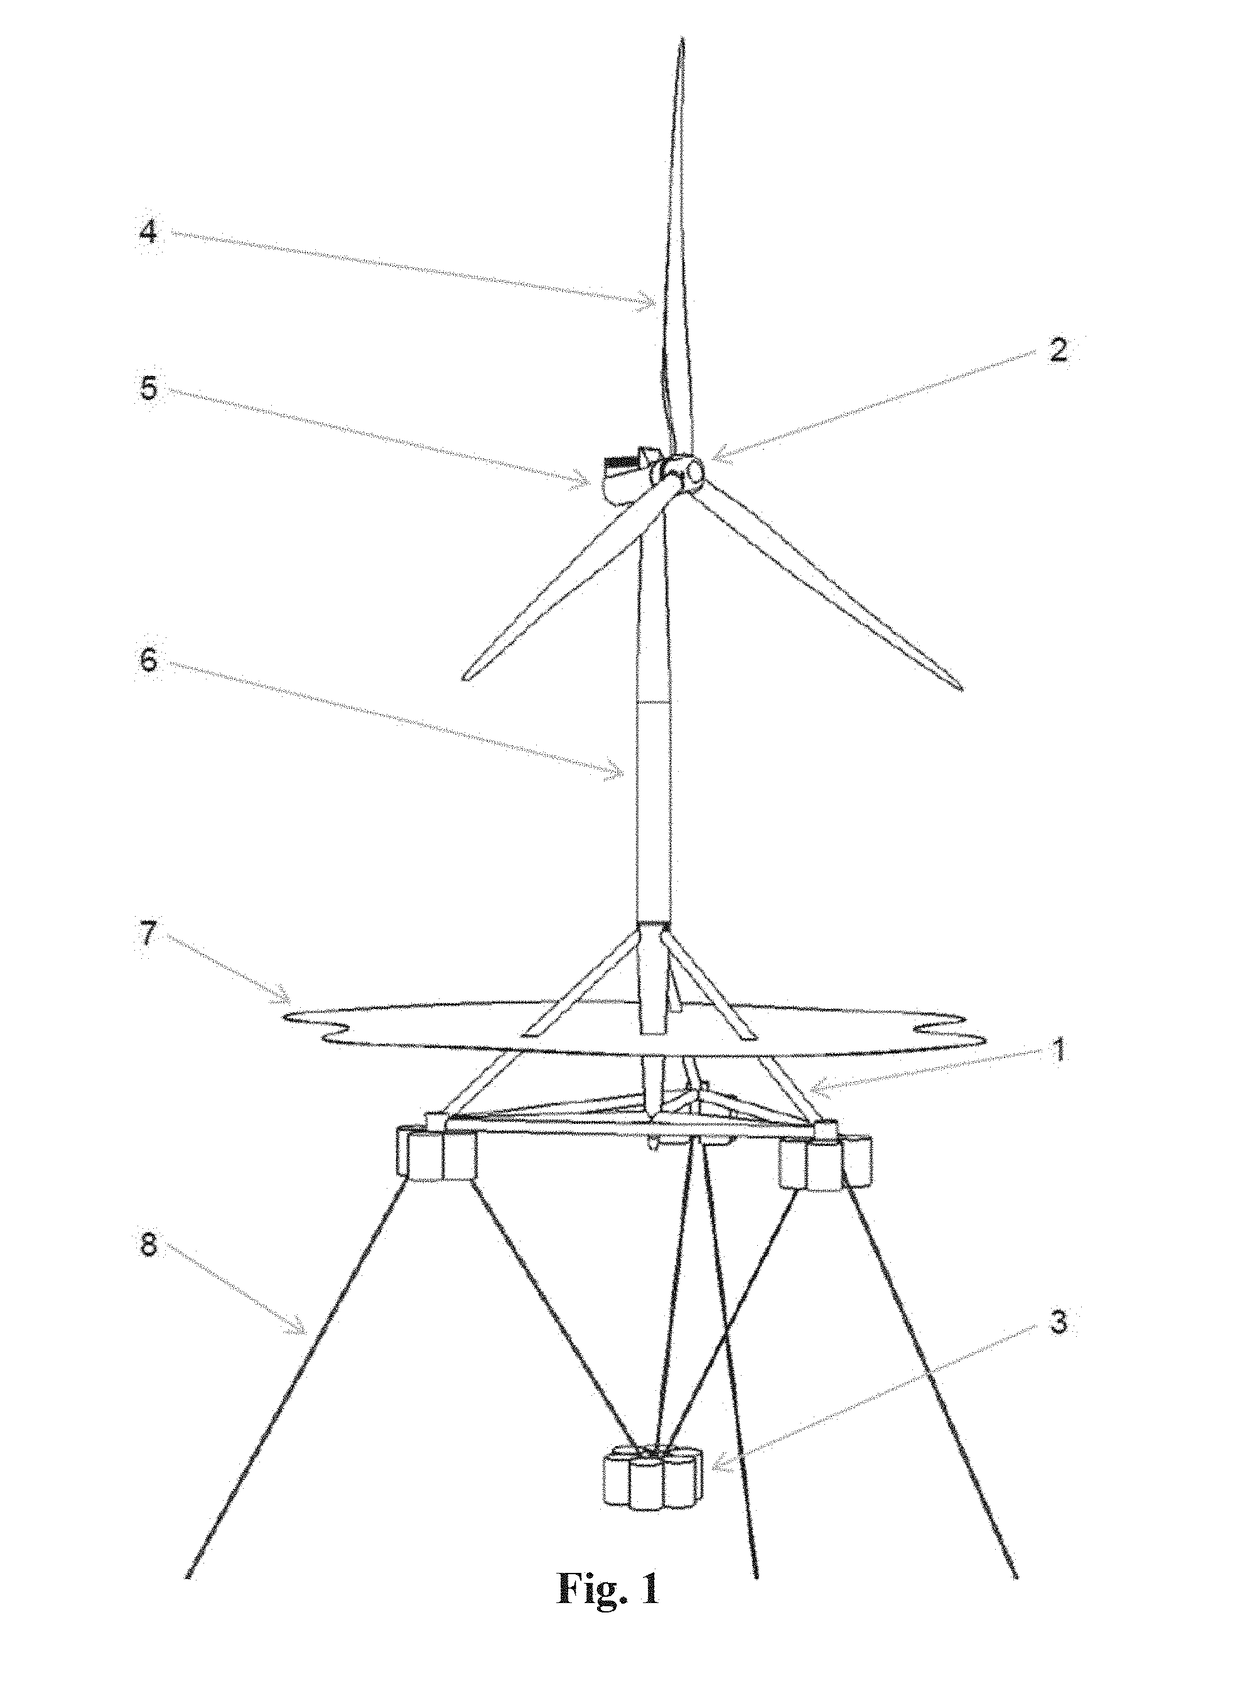 A floating wind turbine and a method for the installation of such floating wind turbine